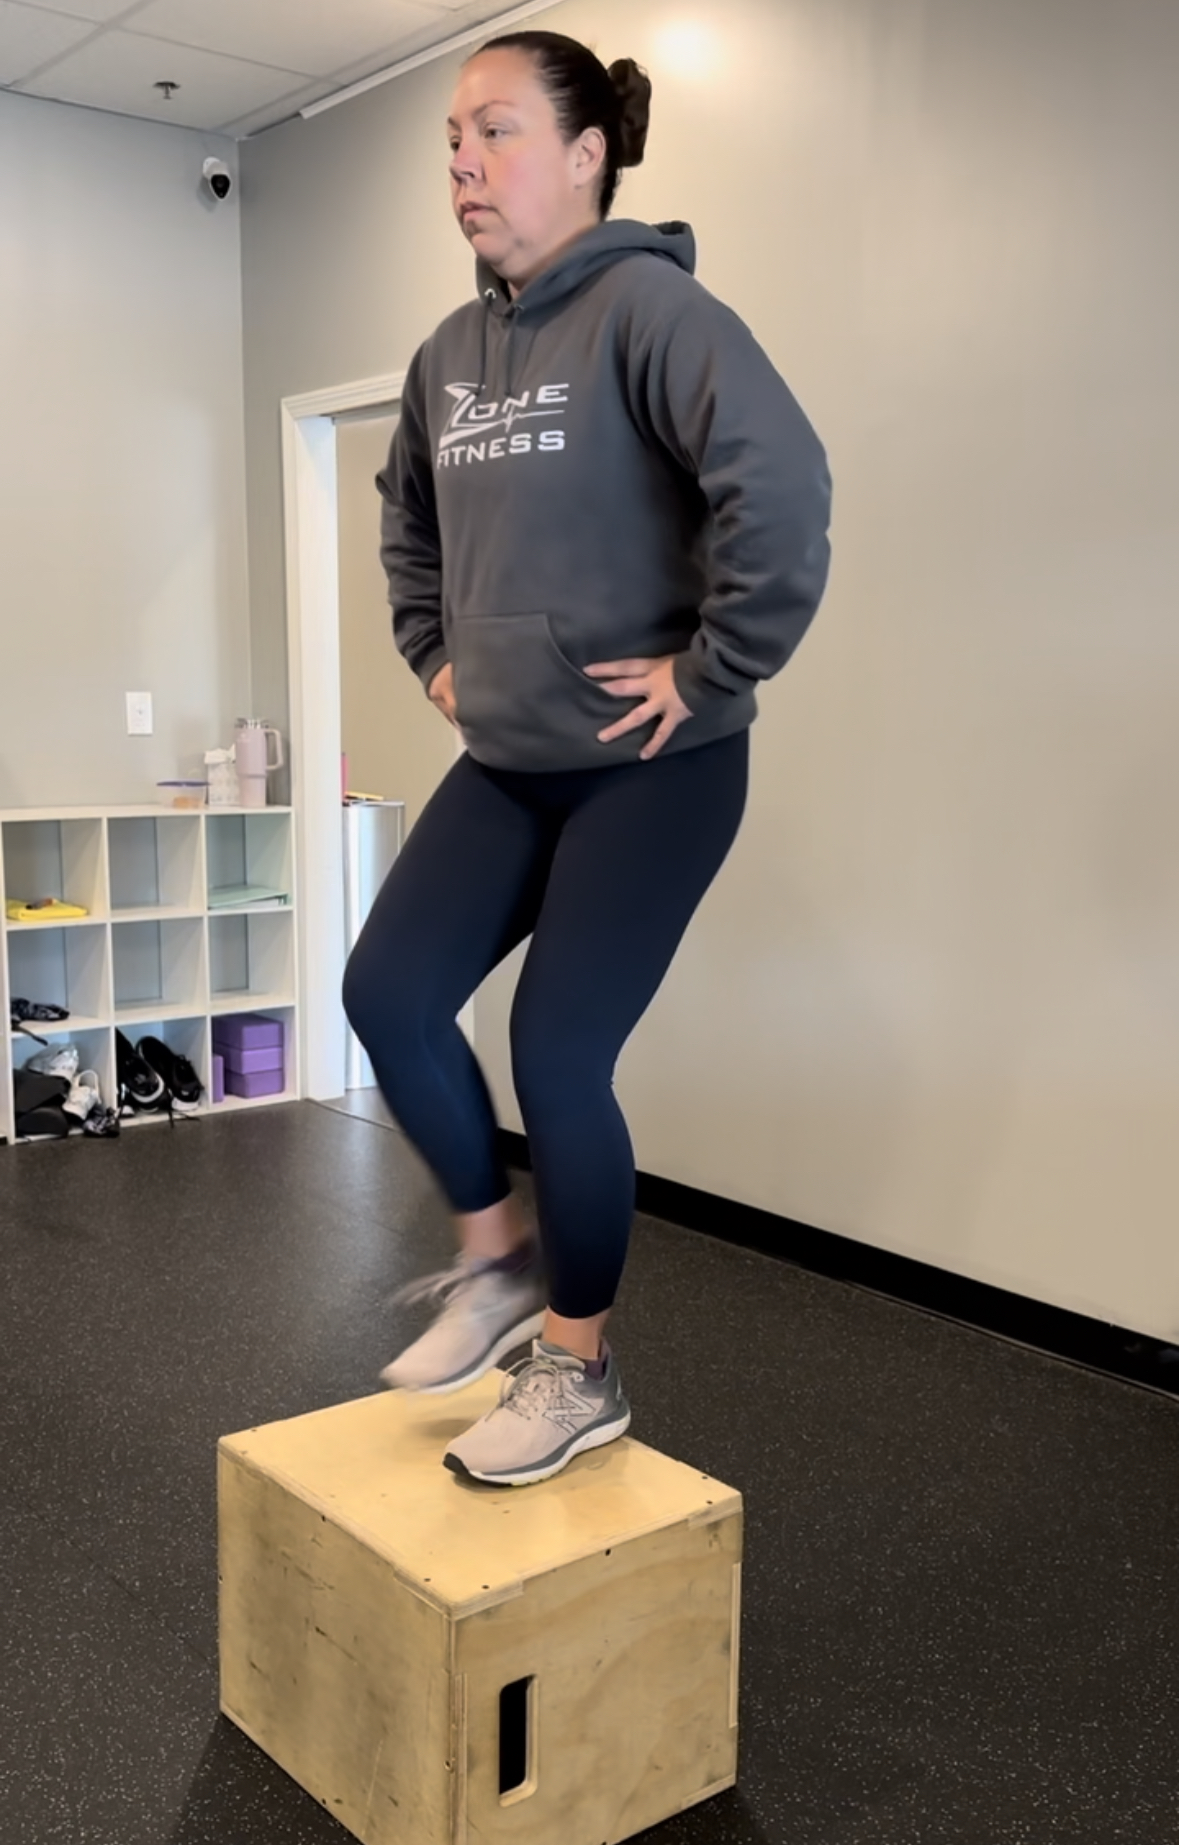 Female personal trainer demonstrating how to do a step up exercise